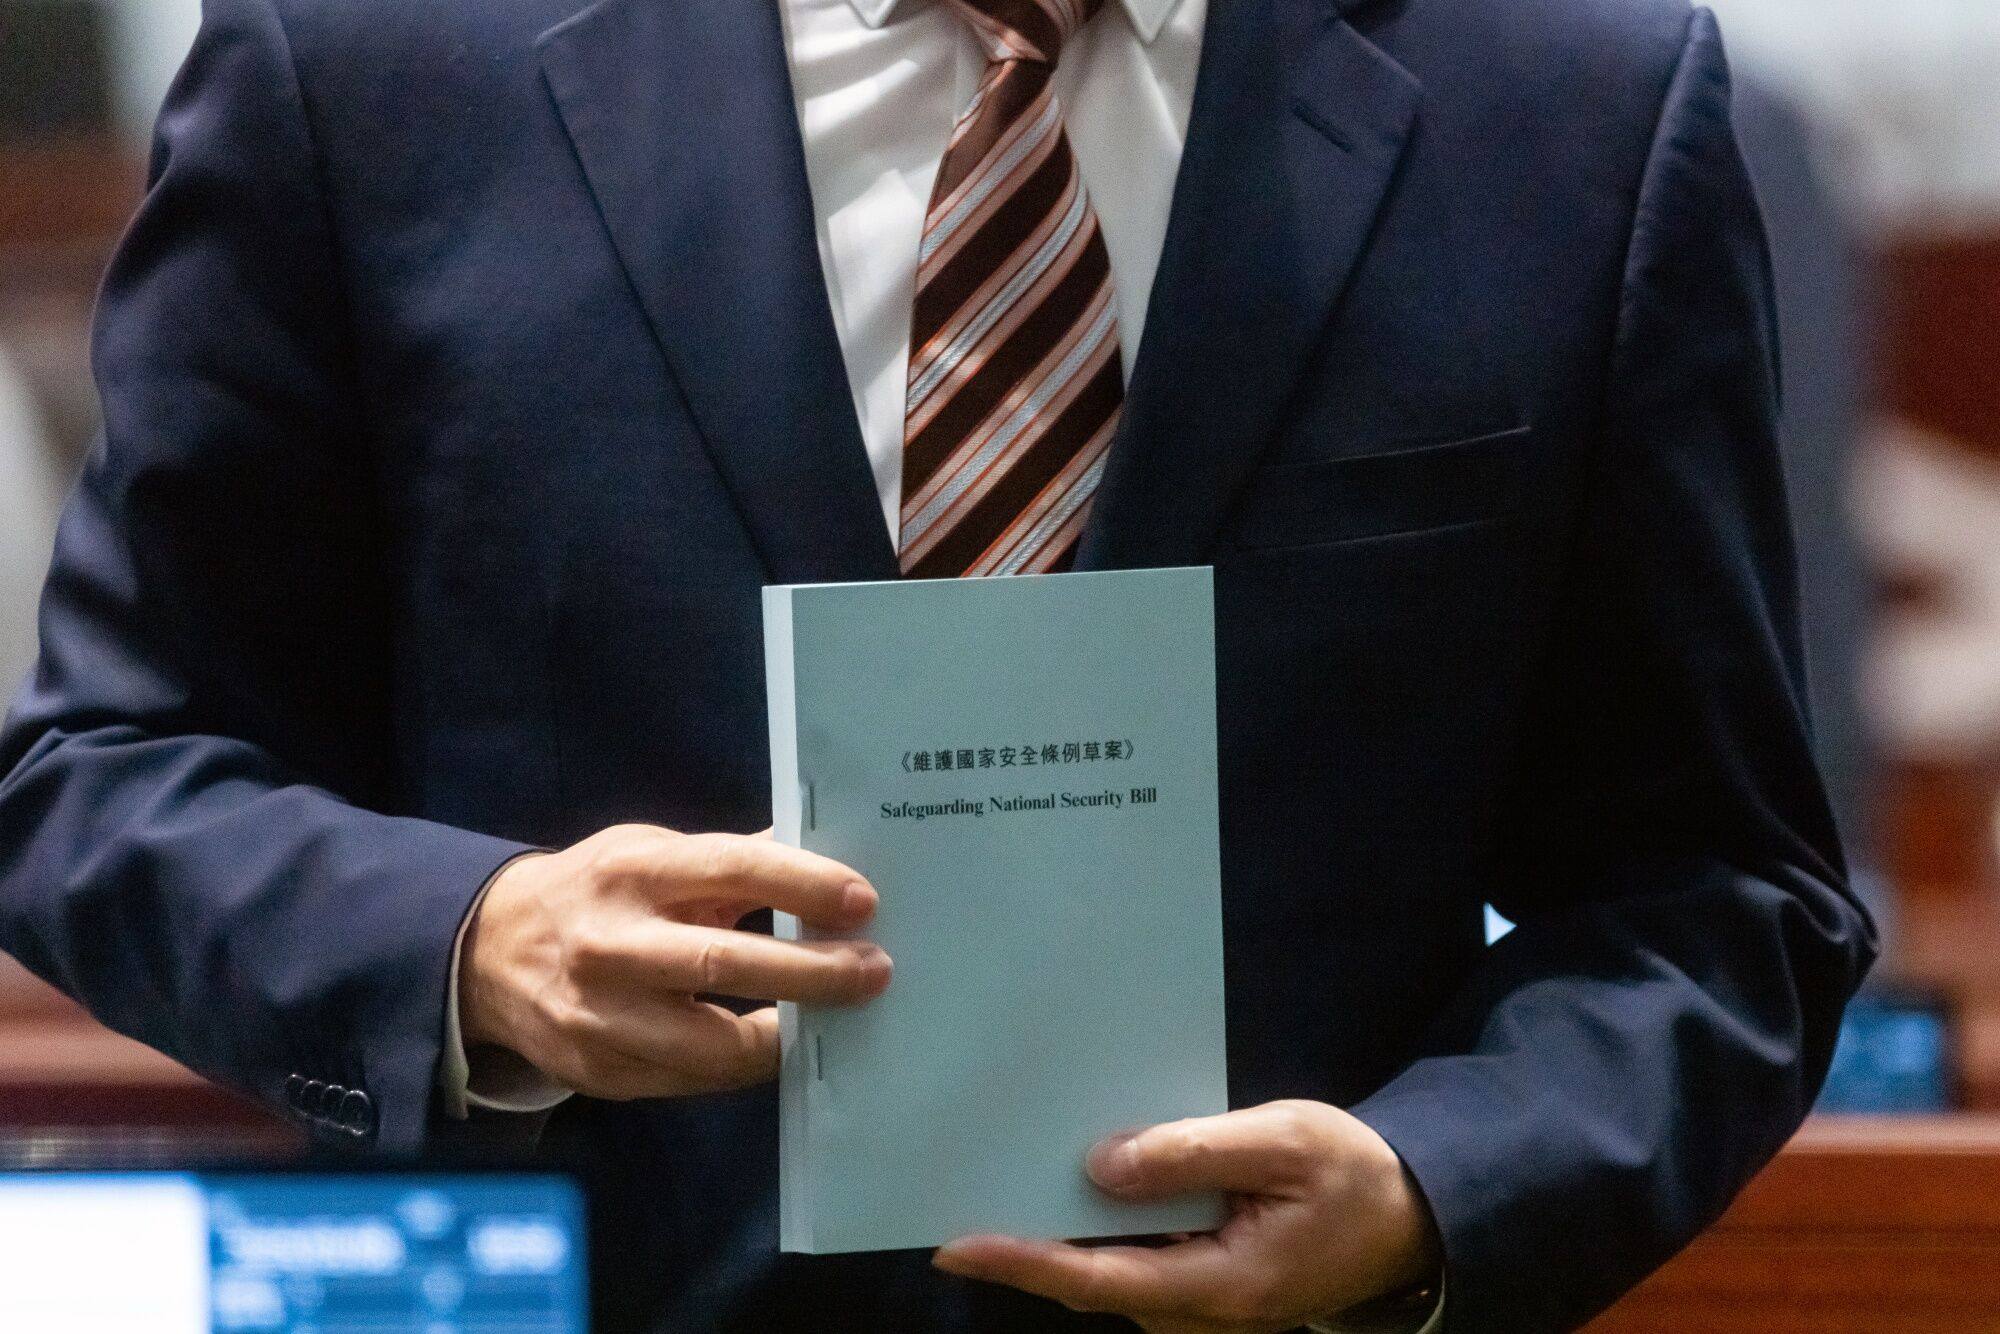 A copy of the proposed Safeguarding National Security Bill is displayed following a special meeting for Article 23 legislation at the Legislative Council in Hong Kong on March 8. Photo: Bloomberg
